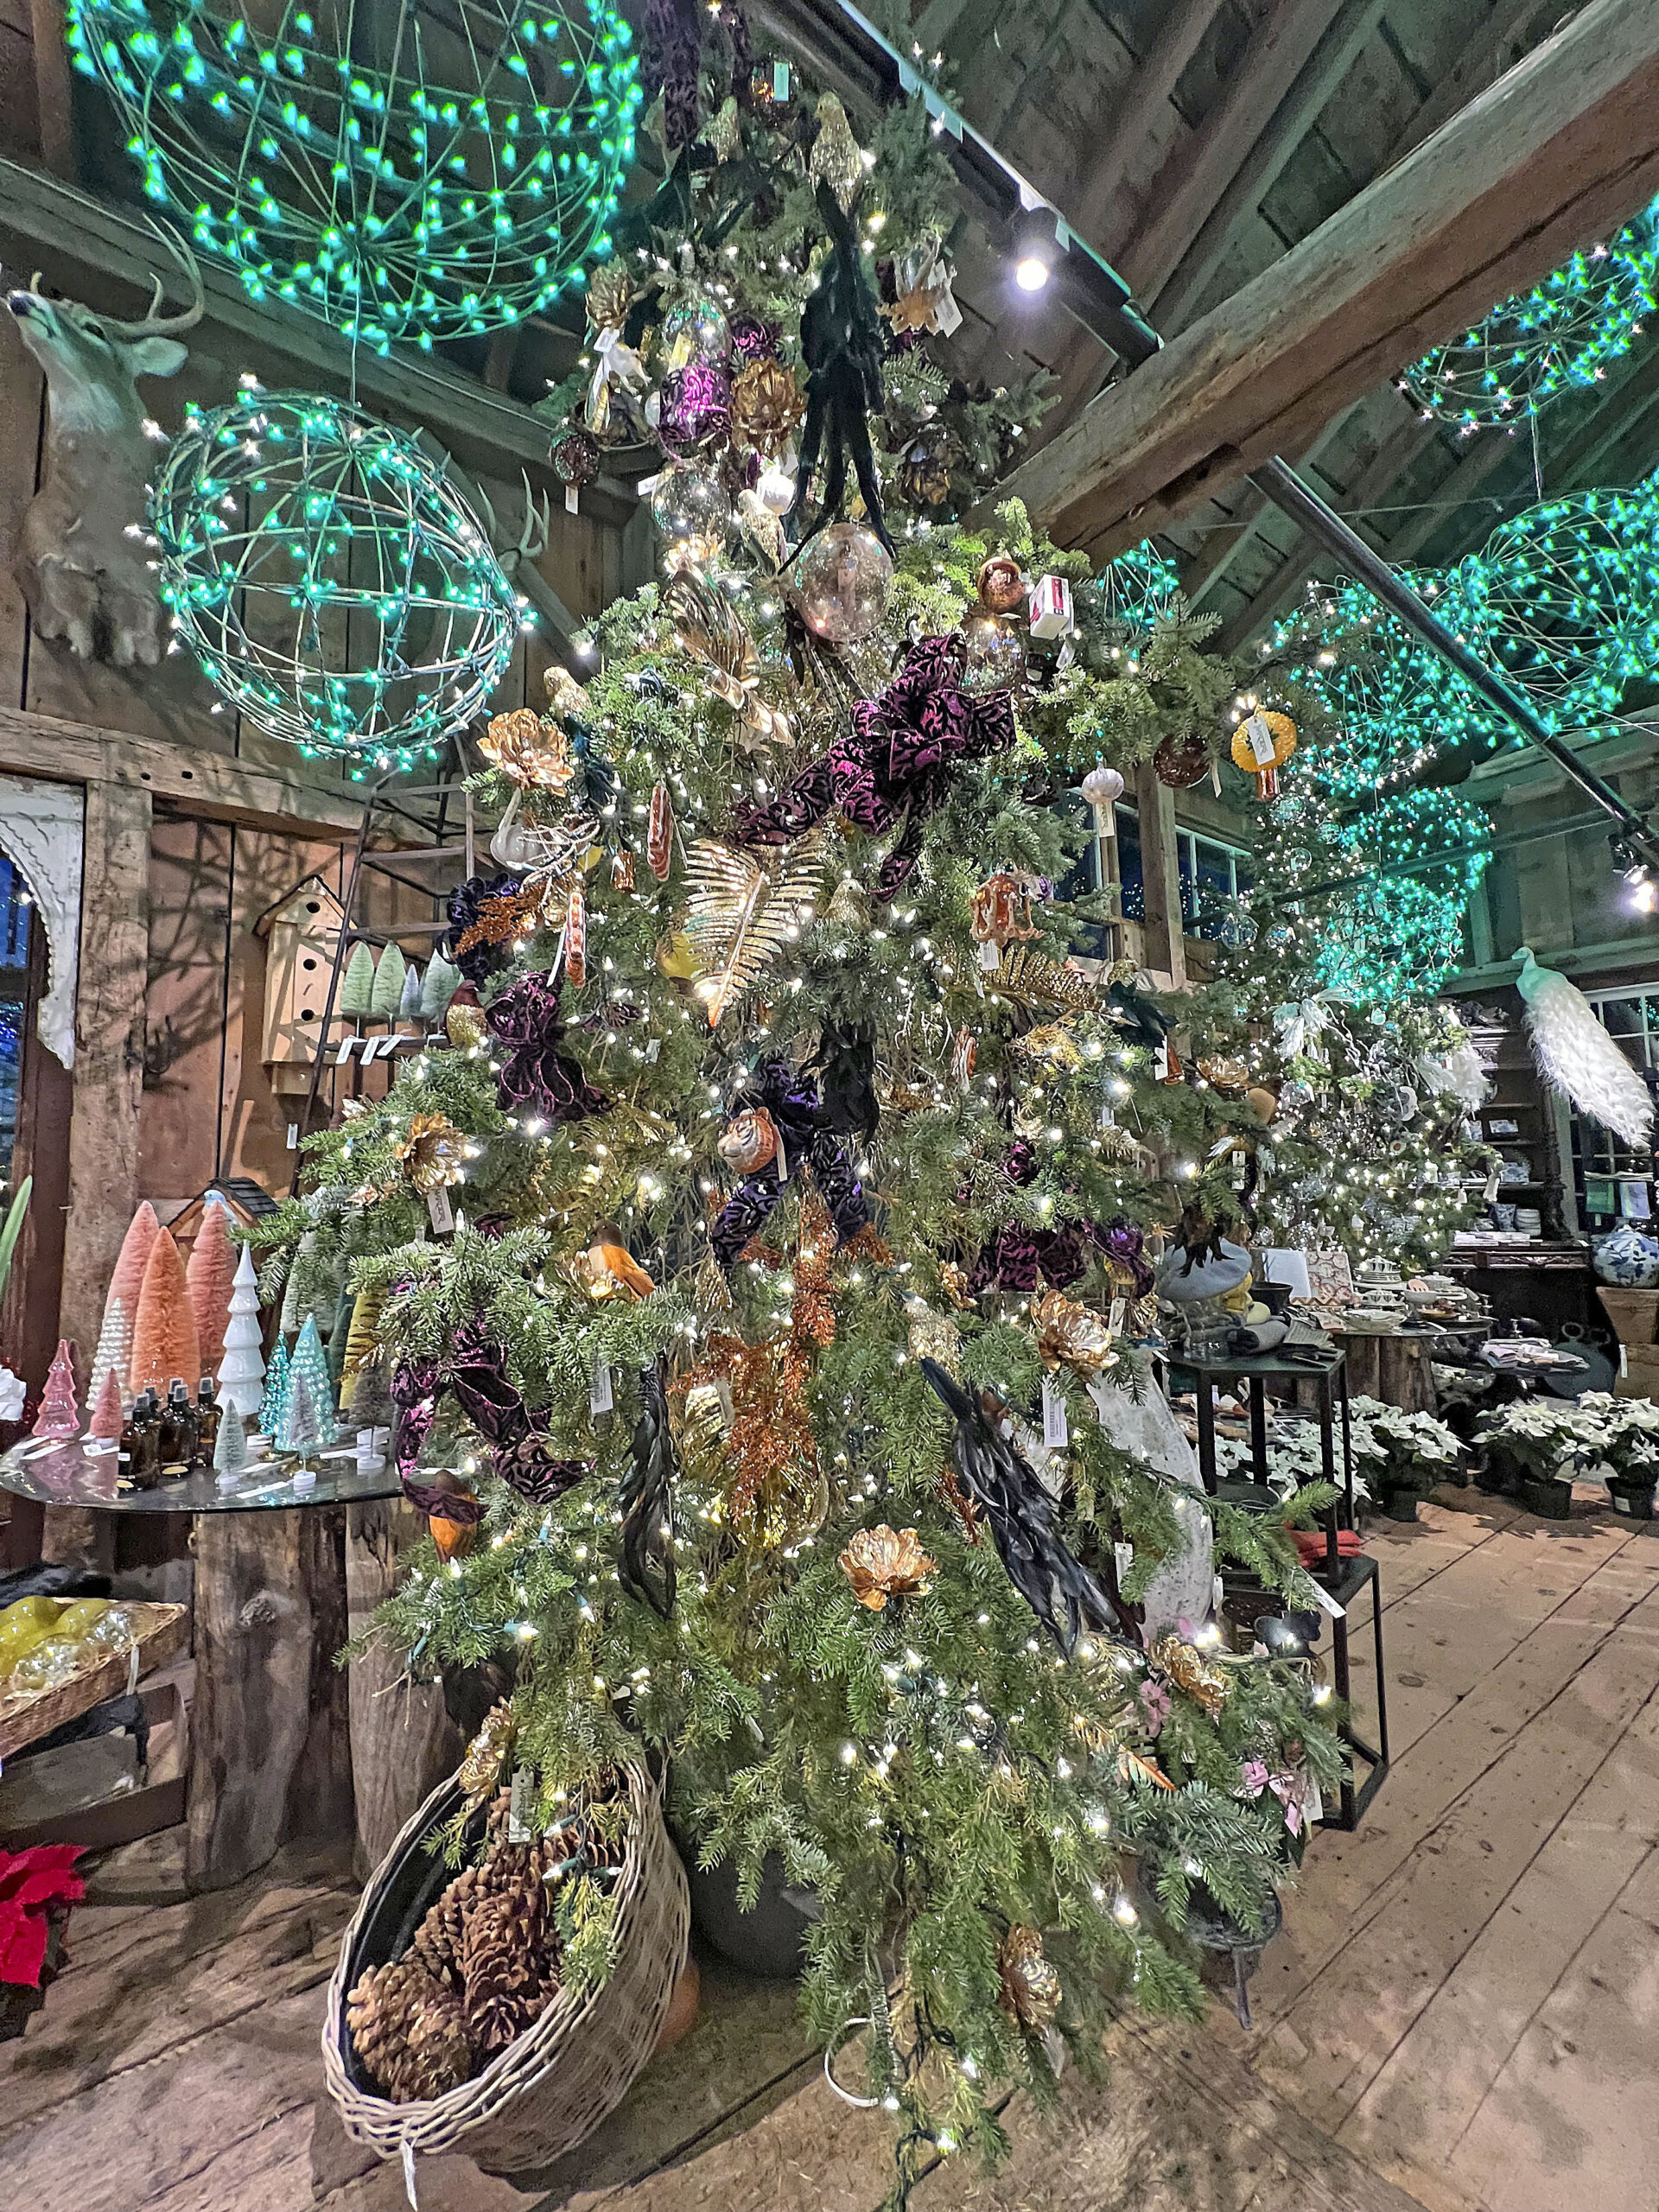 The 2021 Christmas display at Marders Nursery, photographed on November 30th, 2021.  MICHAEL HELLER